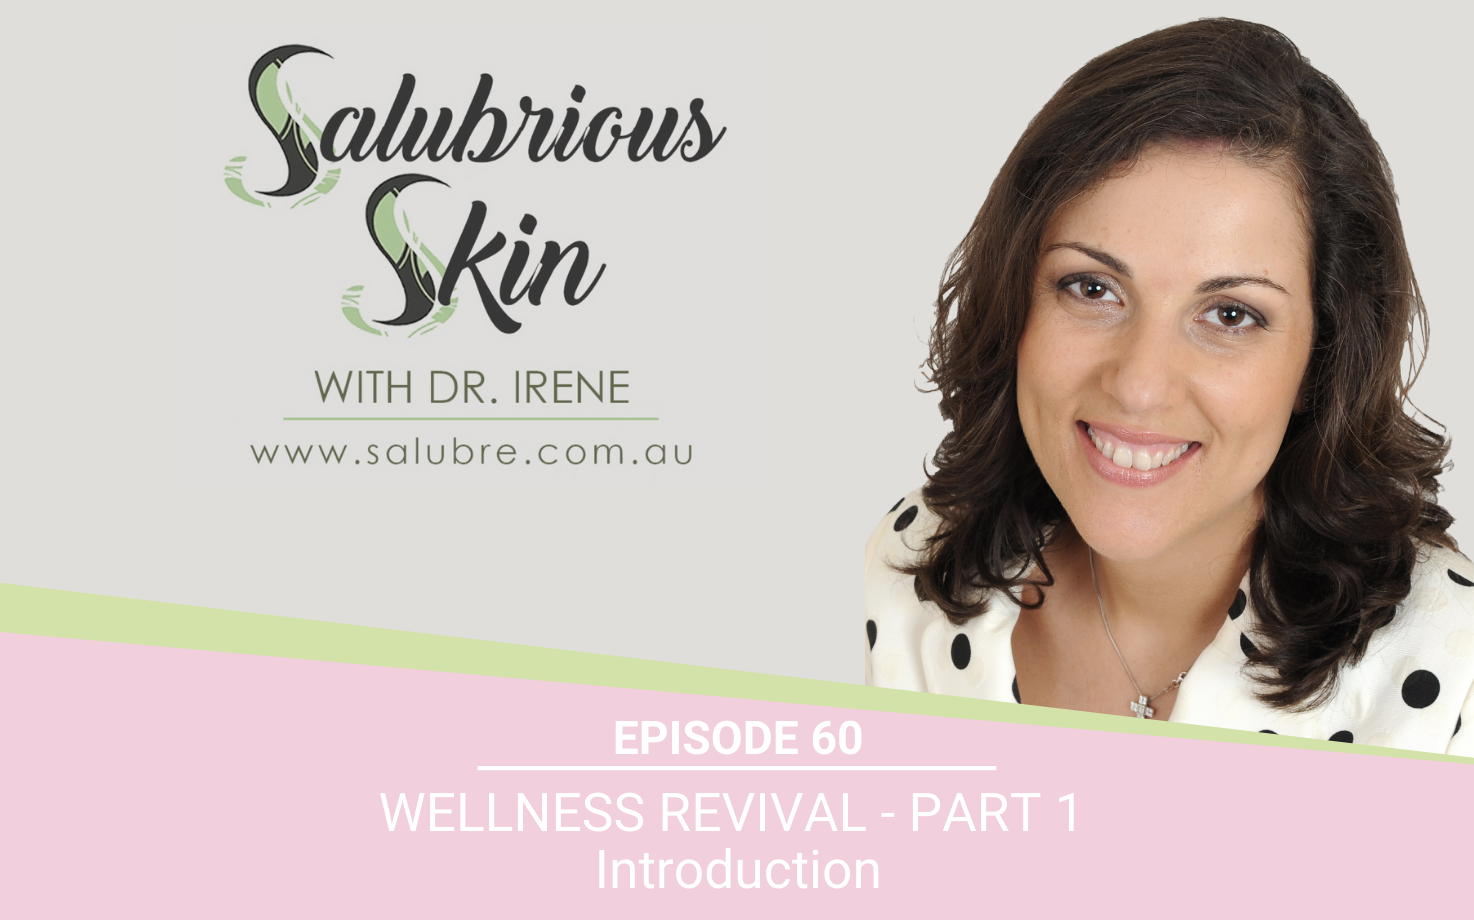 Podcast 60: Wellness Revival - Part 1: Introduction